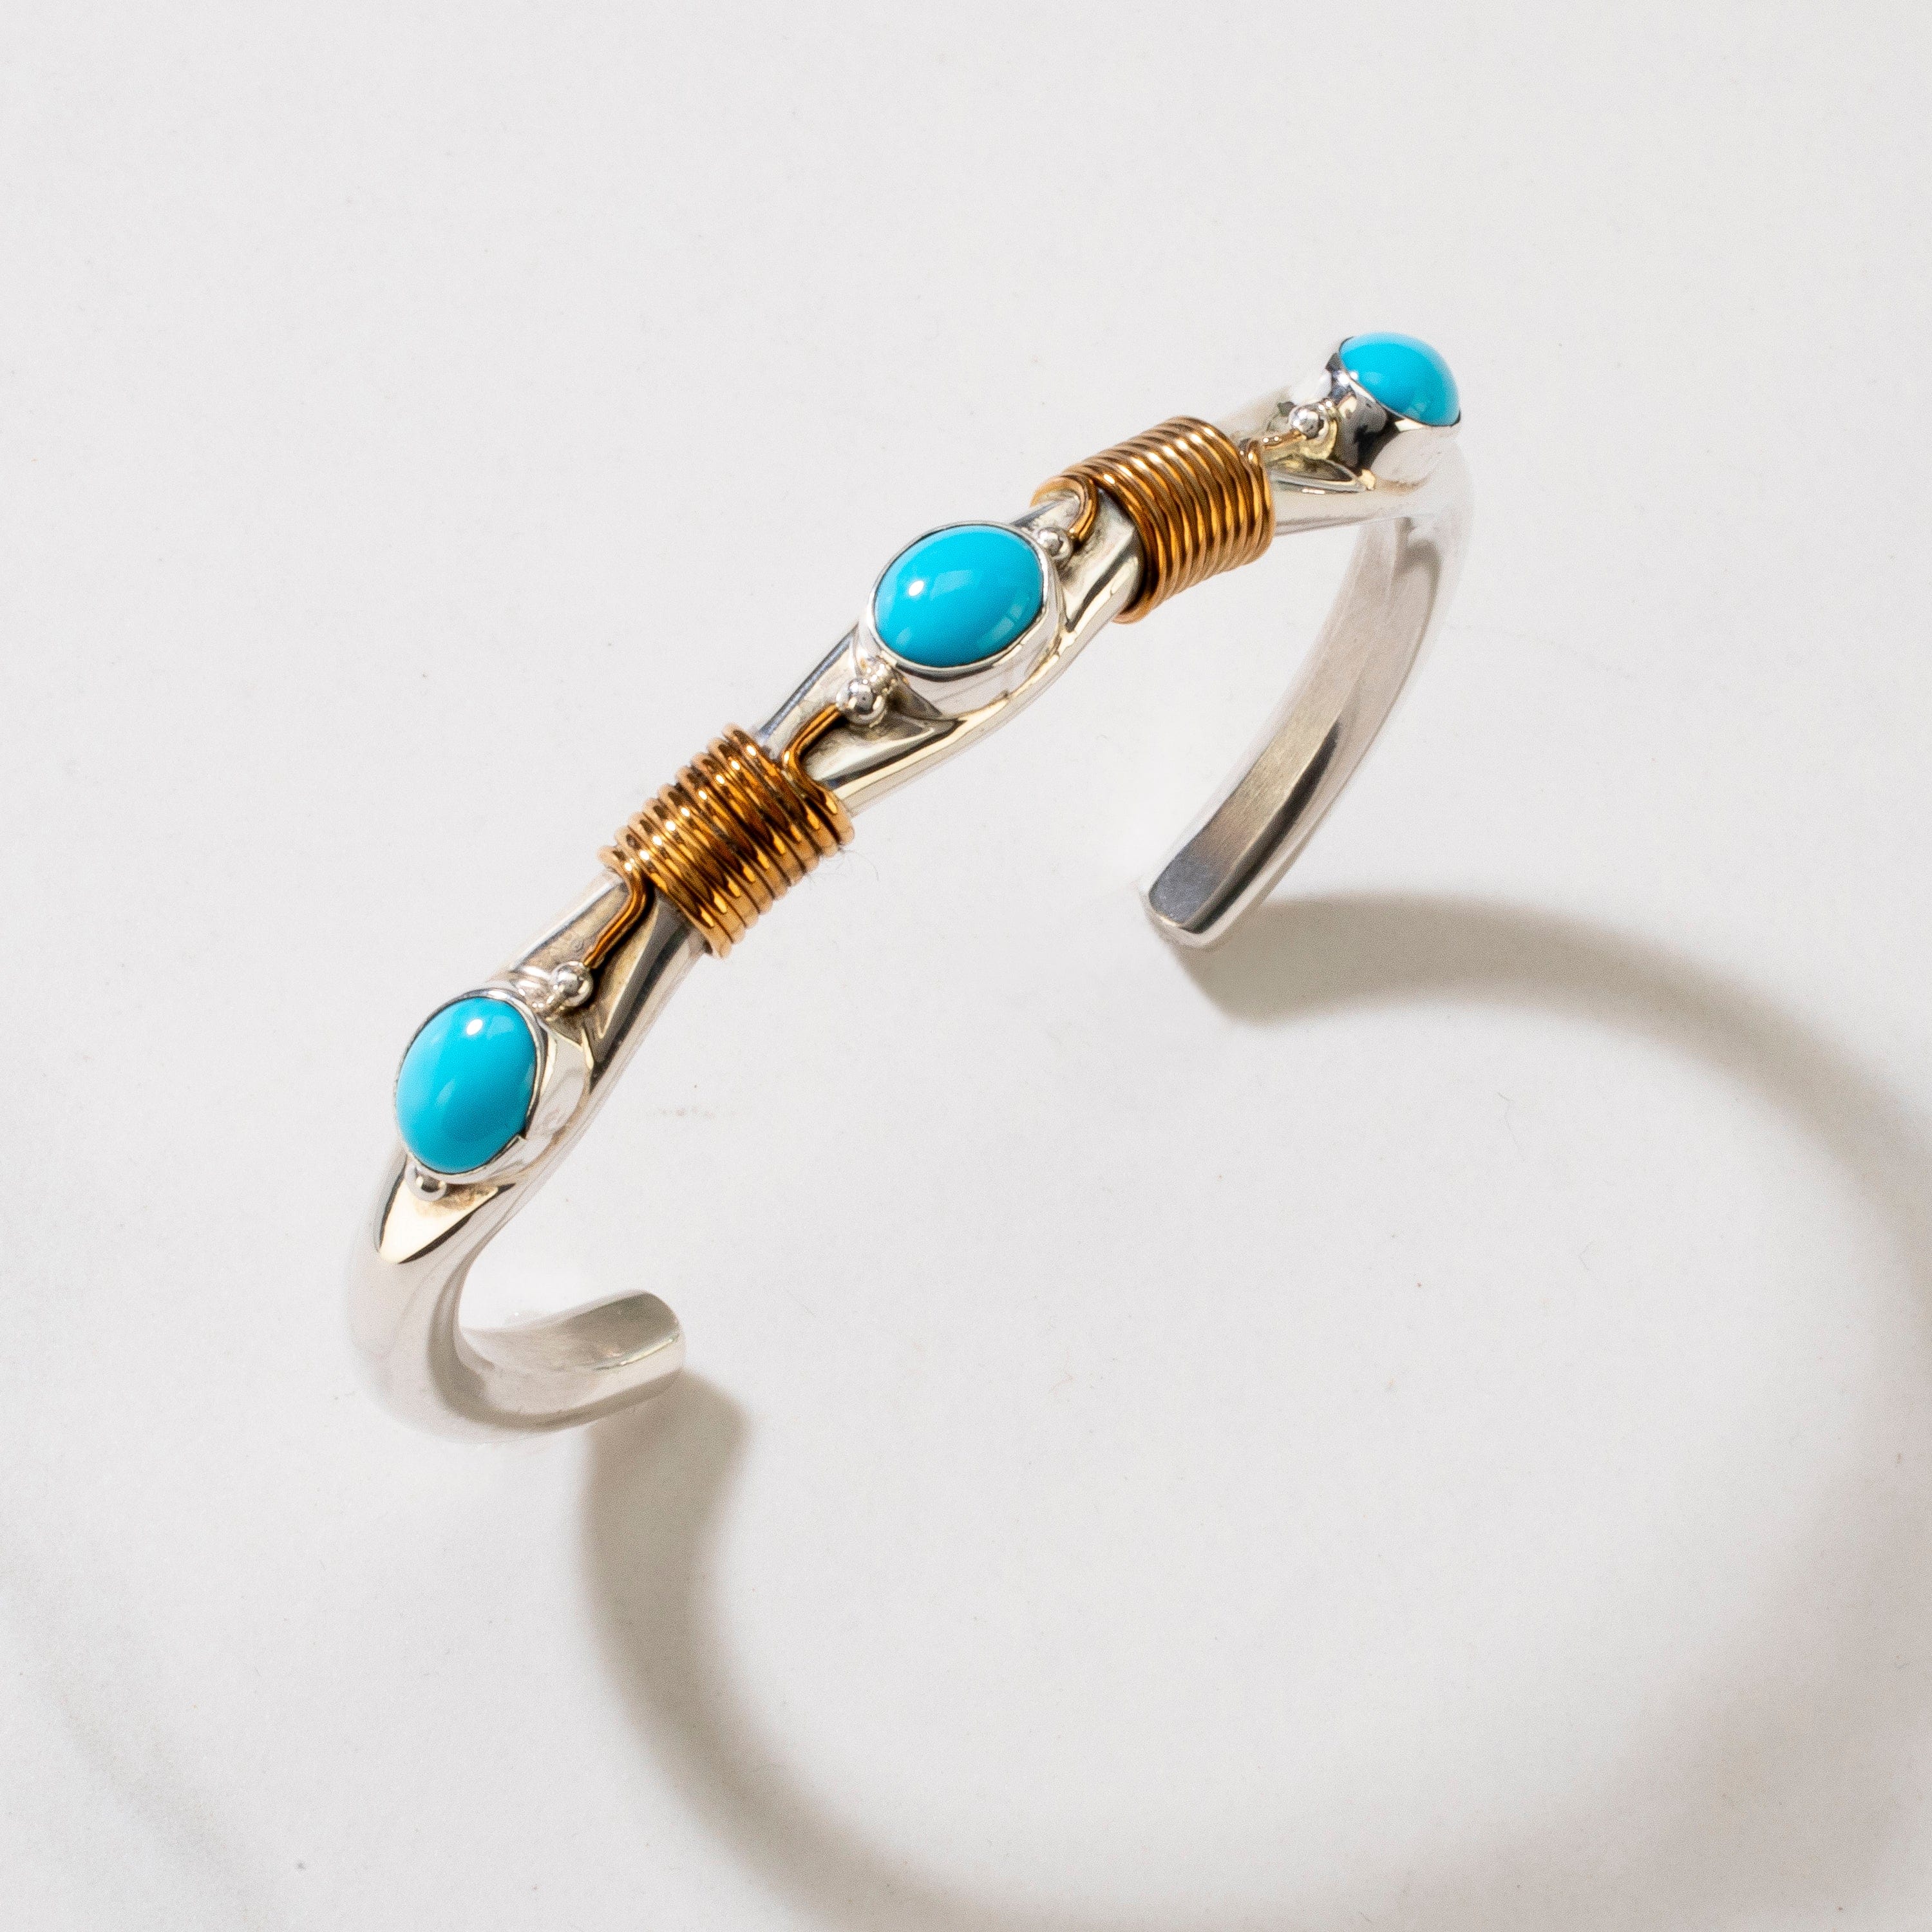 Kalifano Native American Jewelry Russell Sam Navajo Sleeping Beauty Turquoise USA Native American Made 925 Sterling Silver & 12K Gold Filled Cuff NAB1400.008